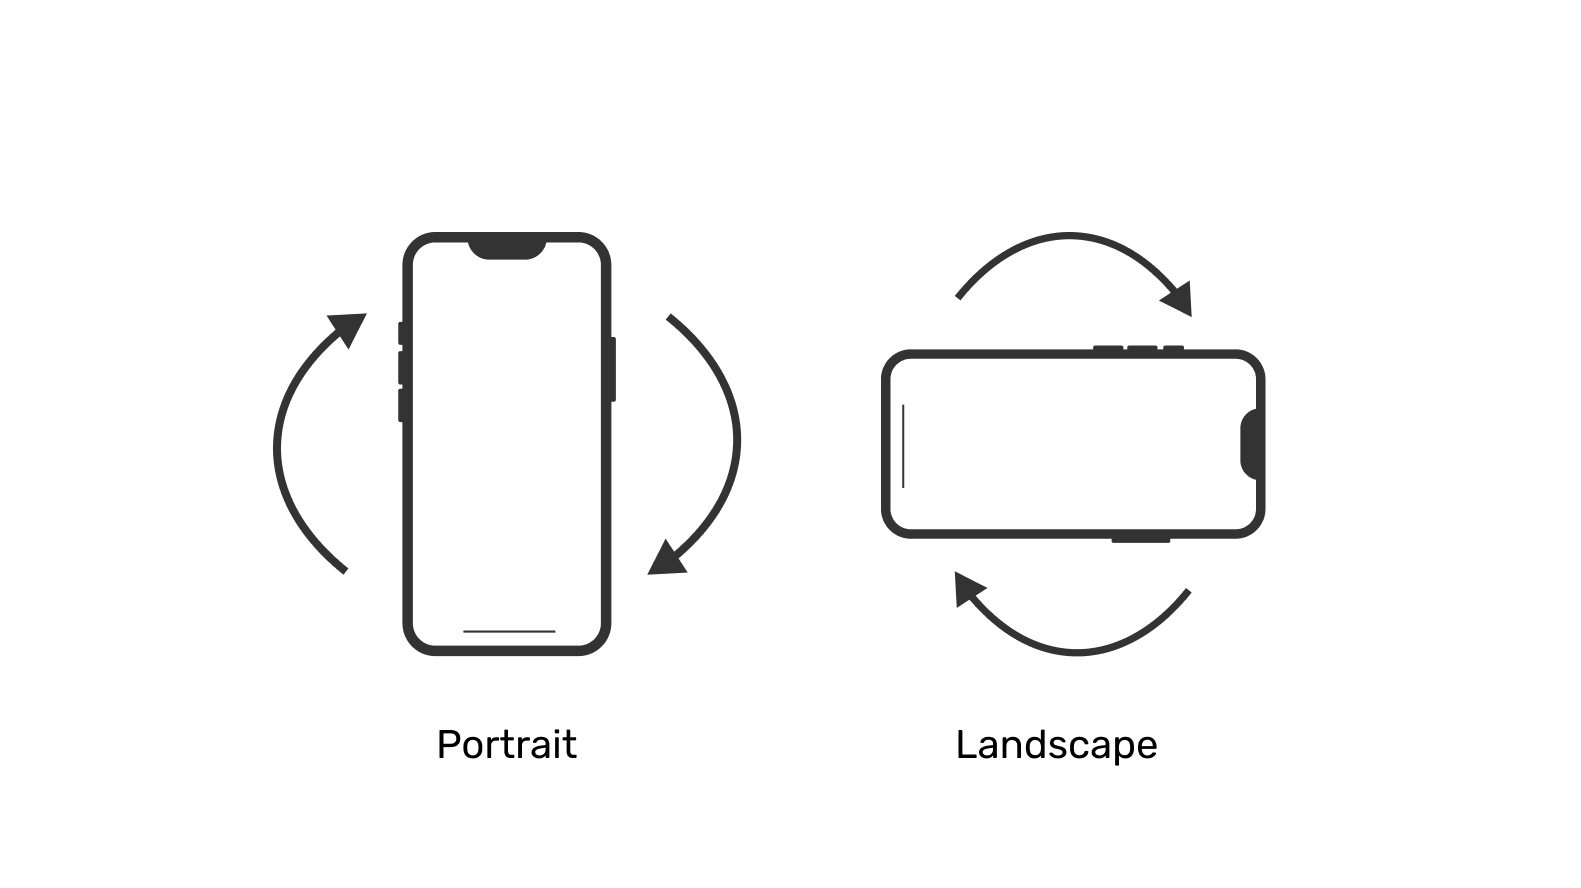 A black and white diagram depicts two mobile phone orientations: portrait and landscape. 